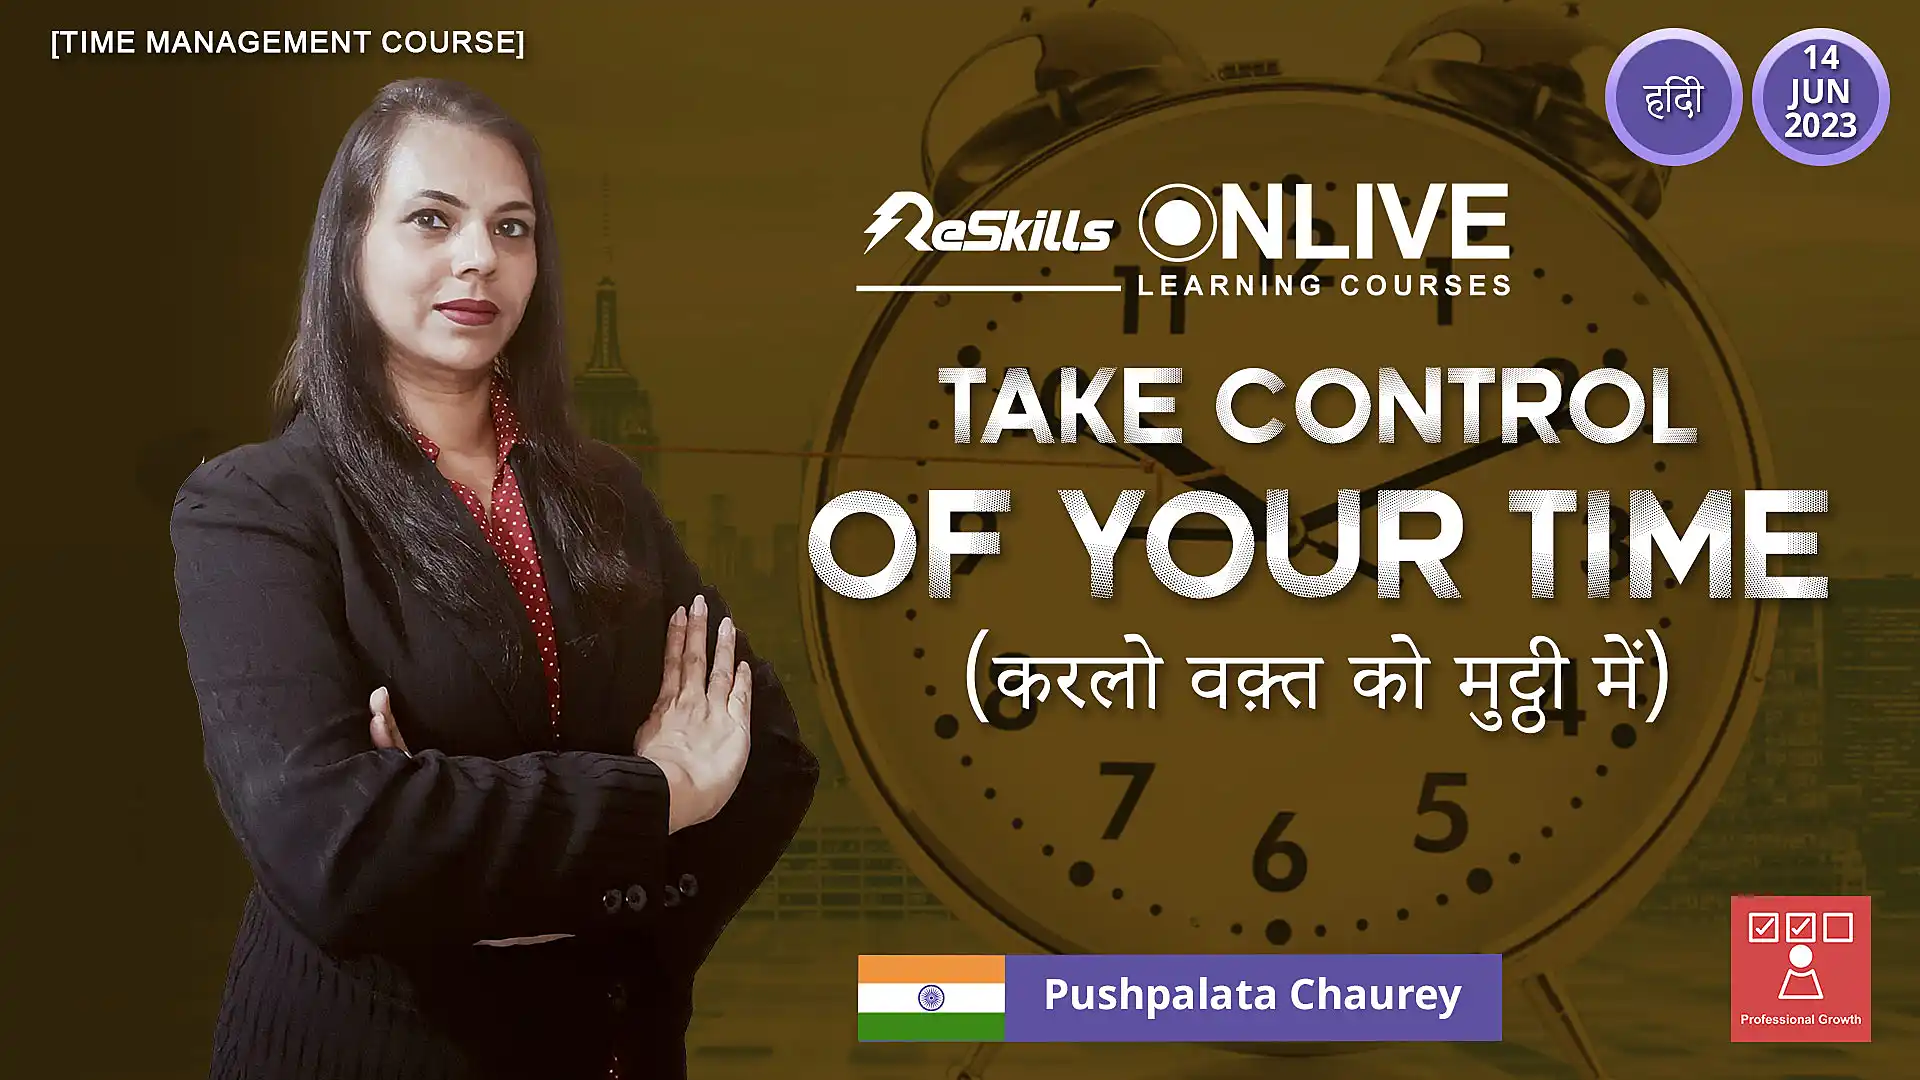 [Time Management Course] Take Control of Your Time (करलो वक़्त को मुट्ठी में) - ReSkills